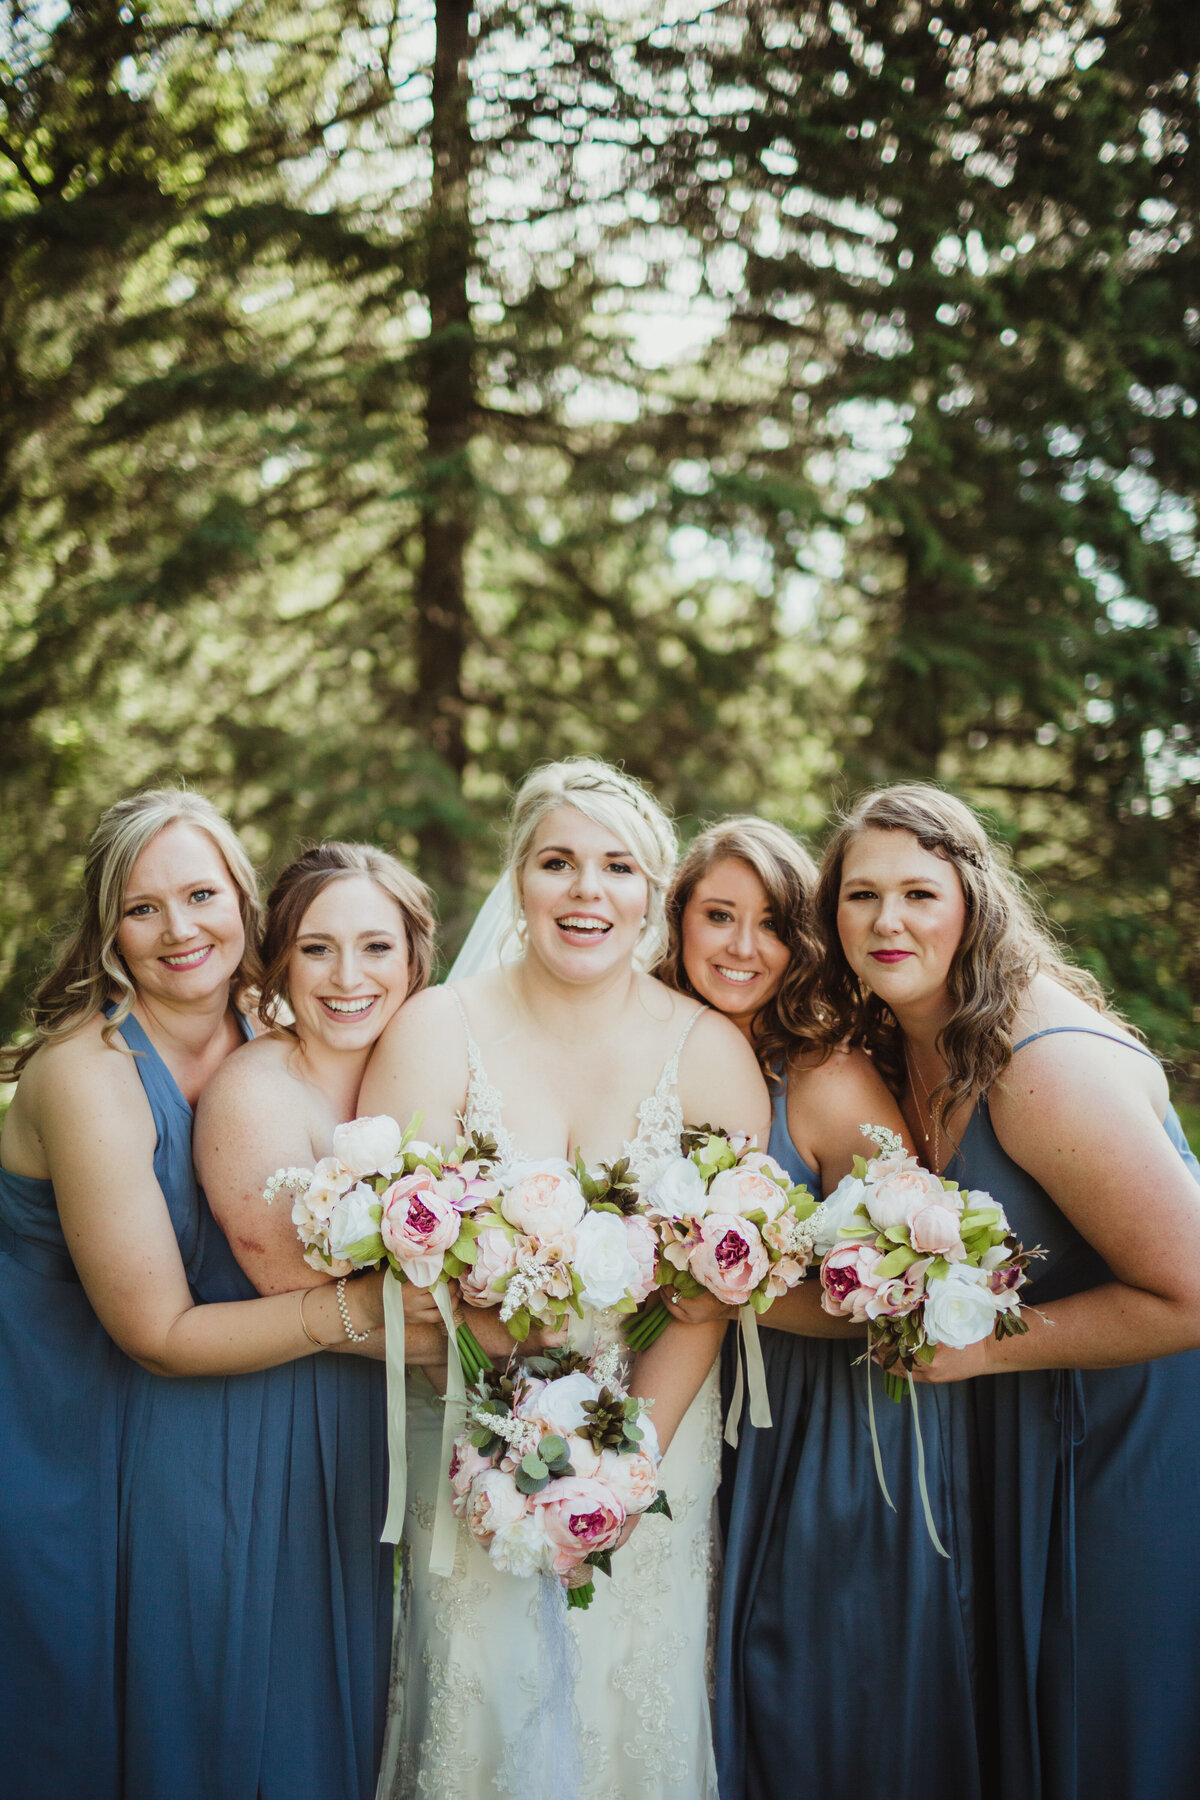 Bride with bridesmaids in blue dresses with trees in background